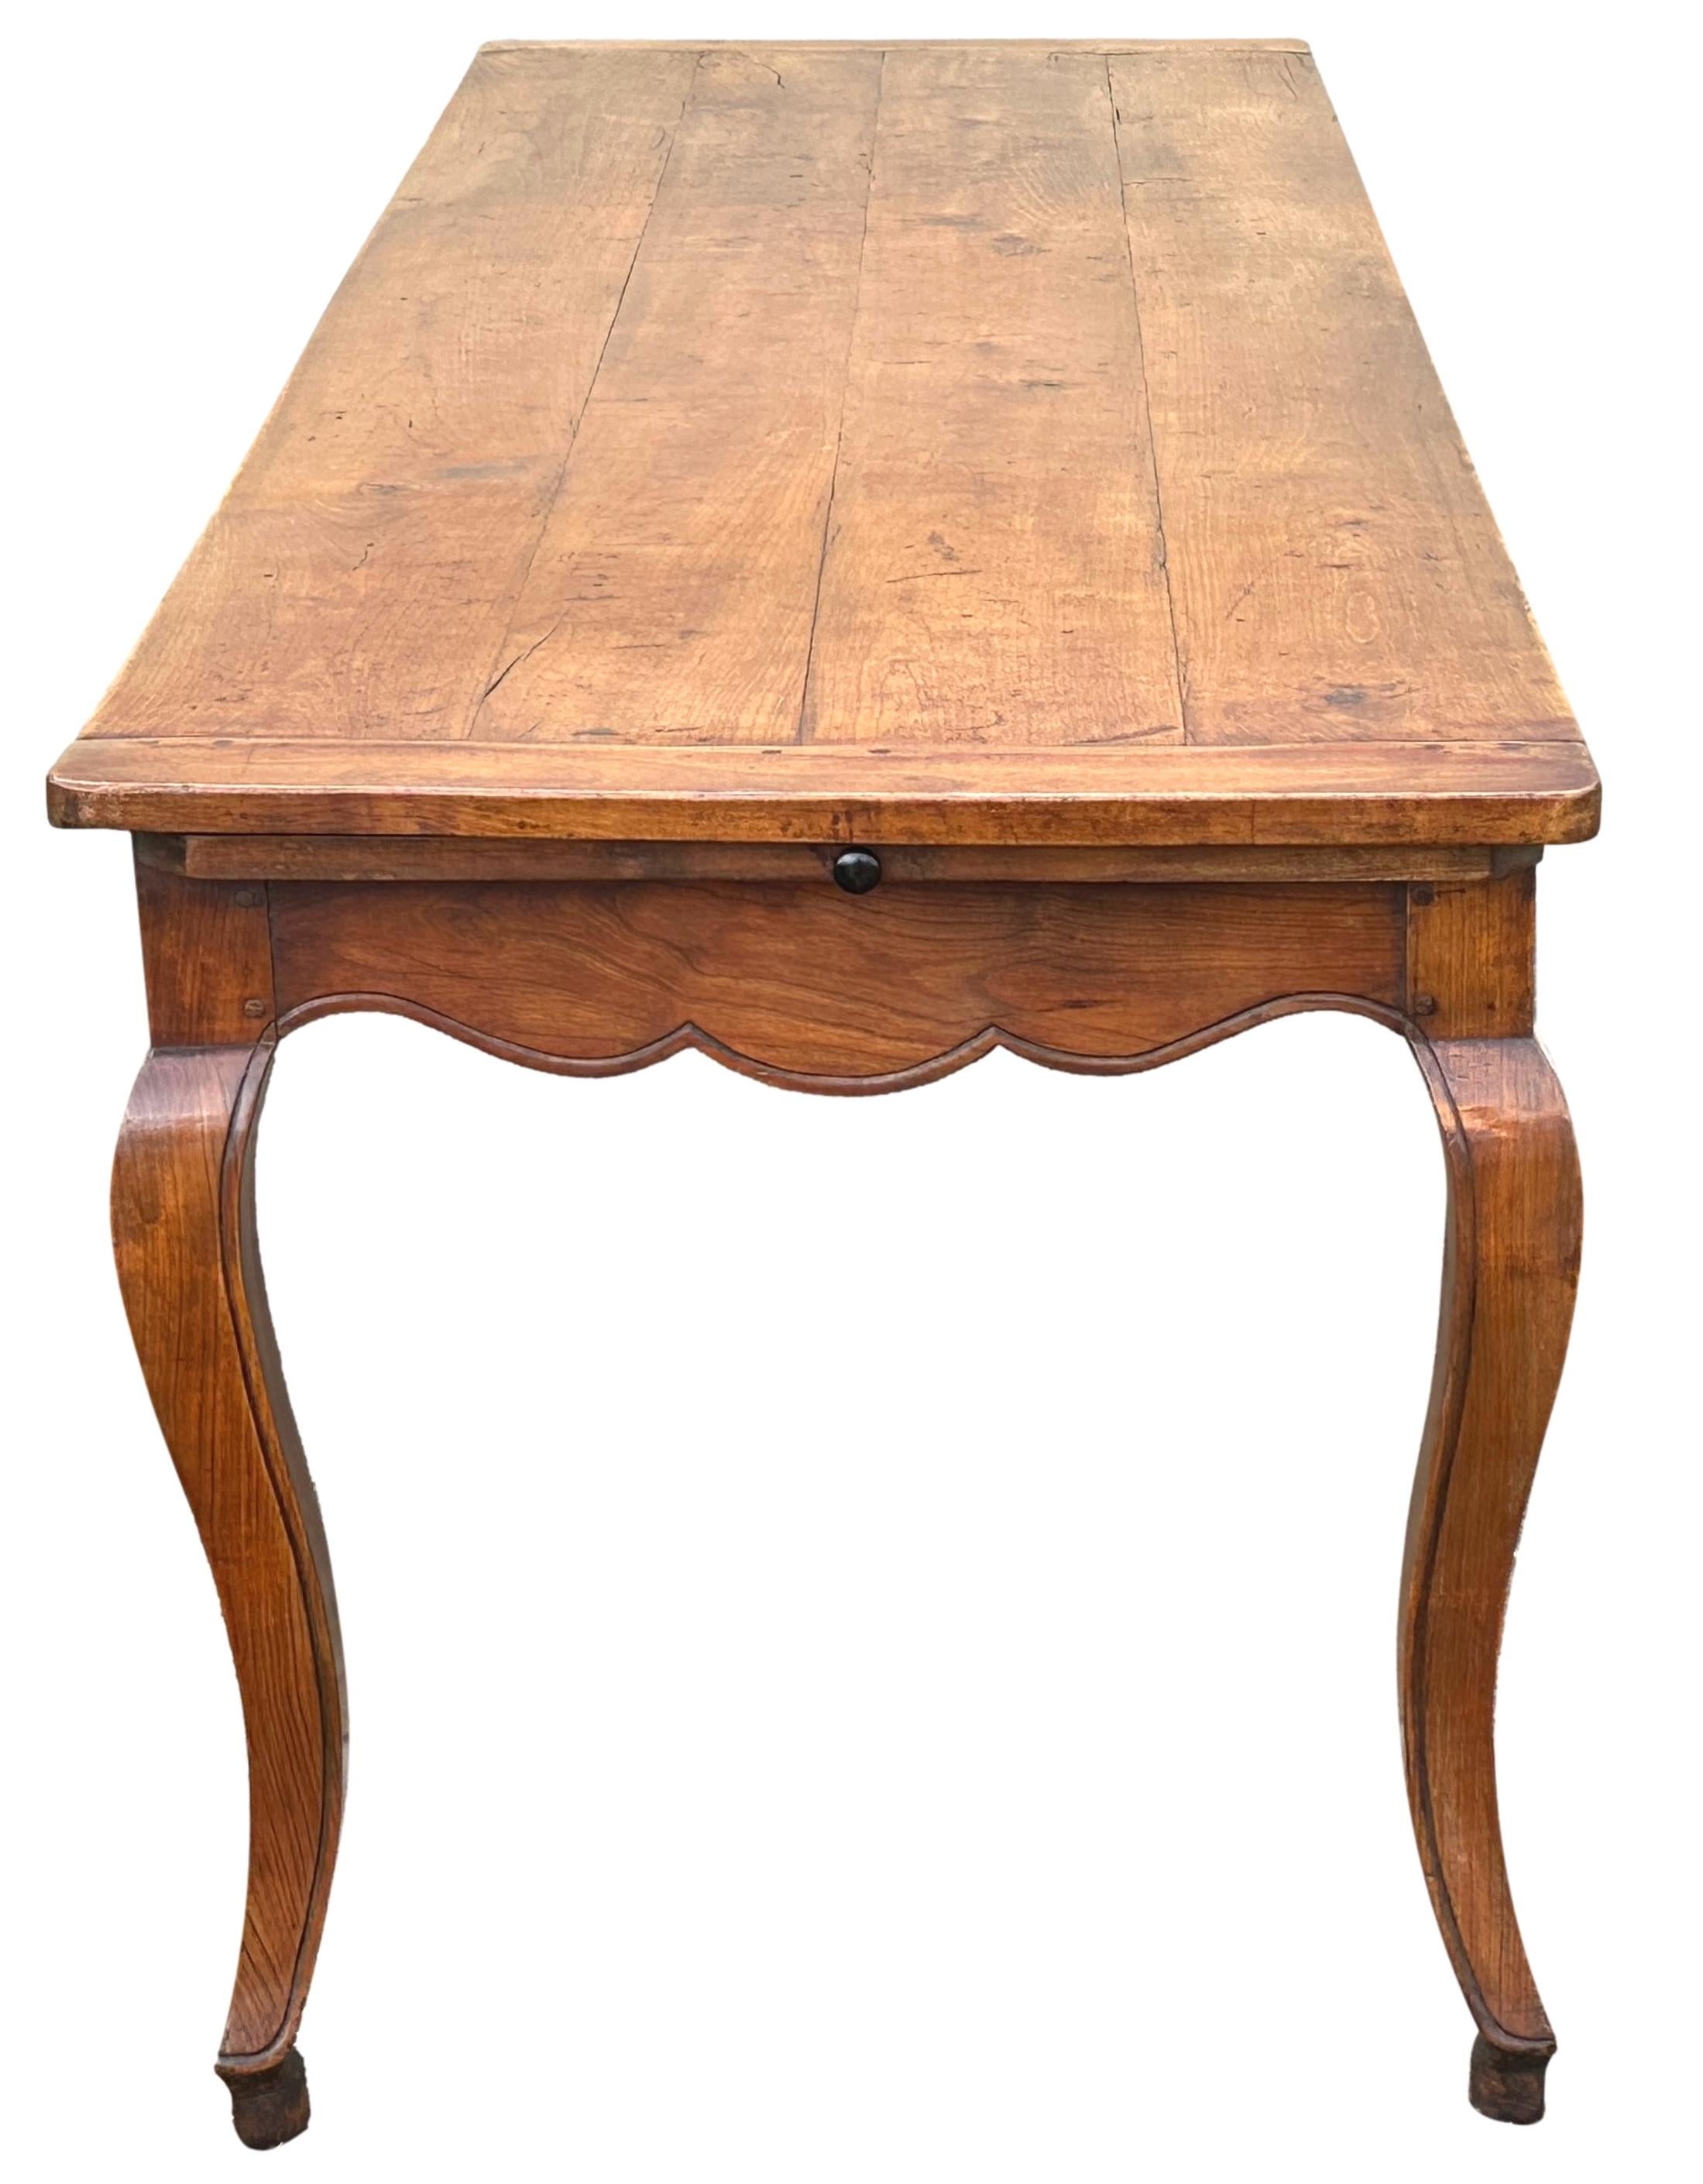 Large Early 19th Century French Cherry Wood Farmhouse Kitchen Table For Sale 5